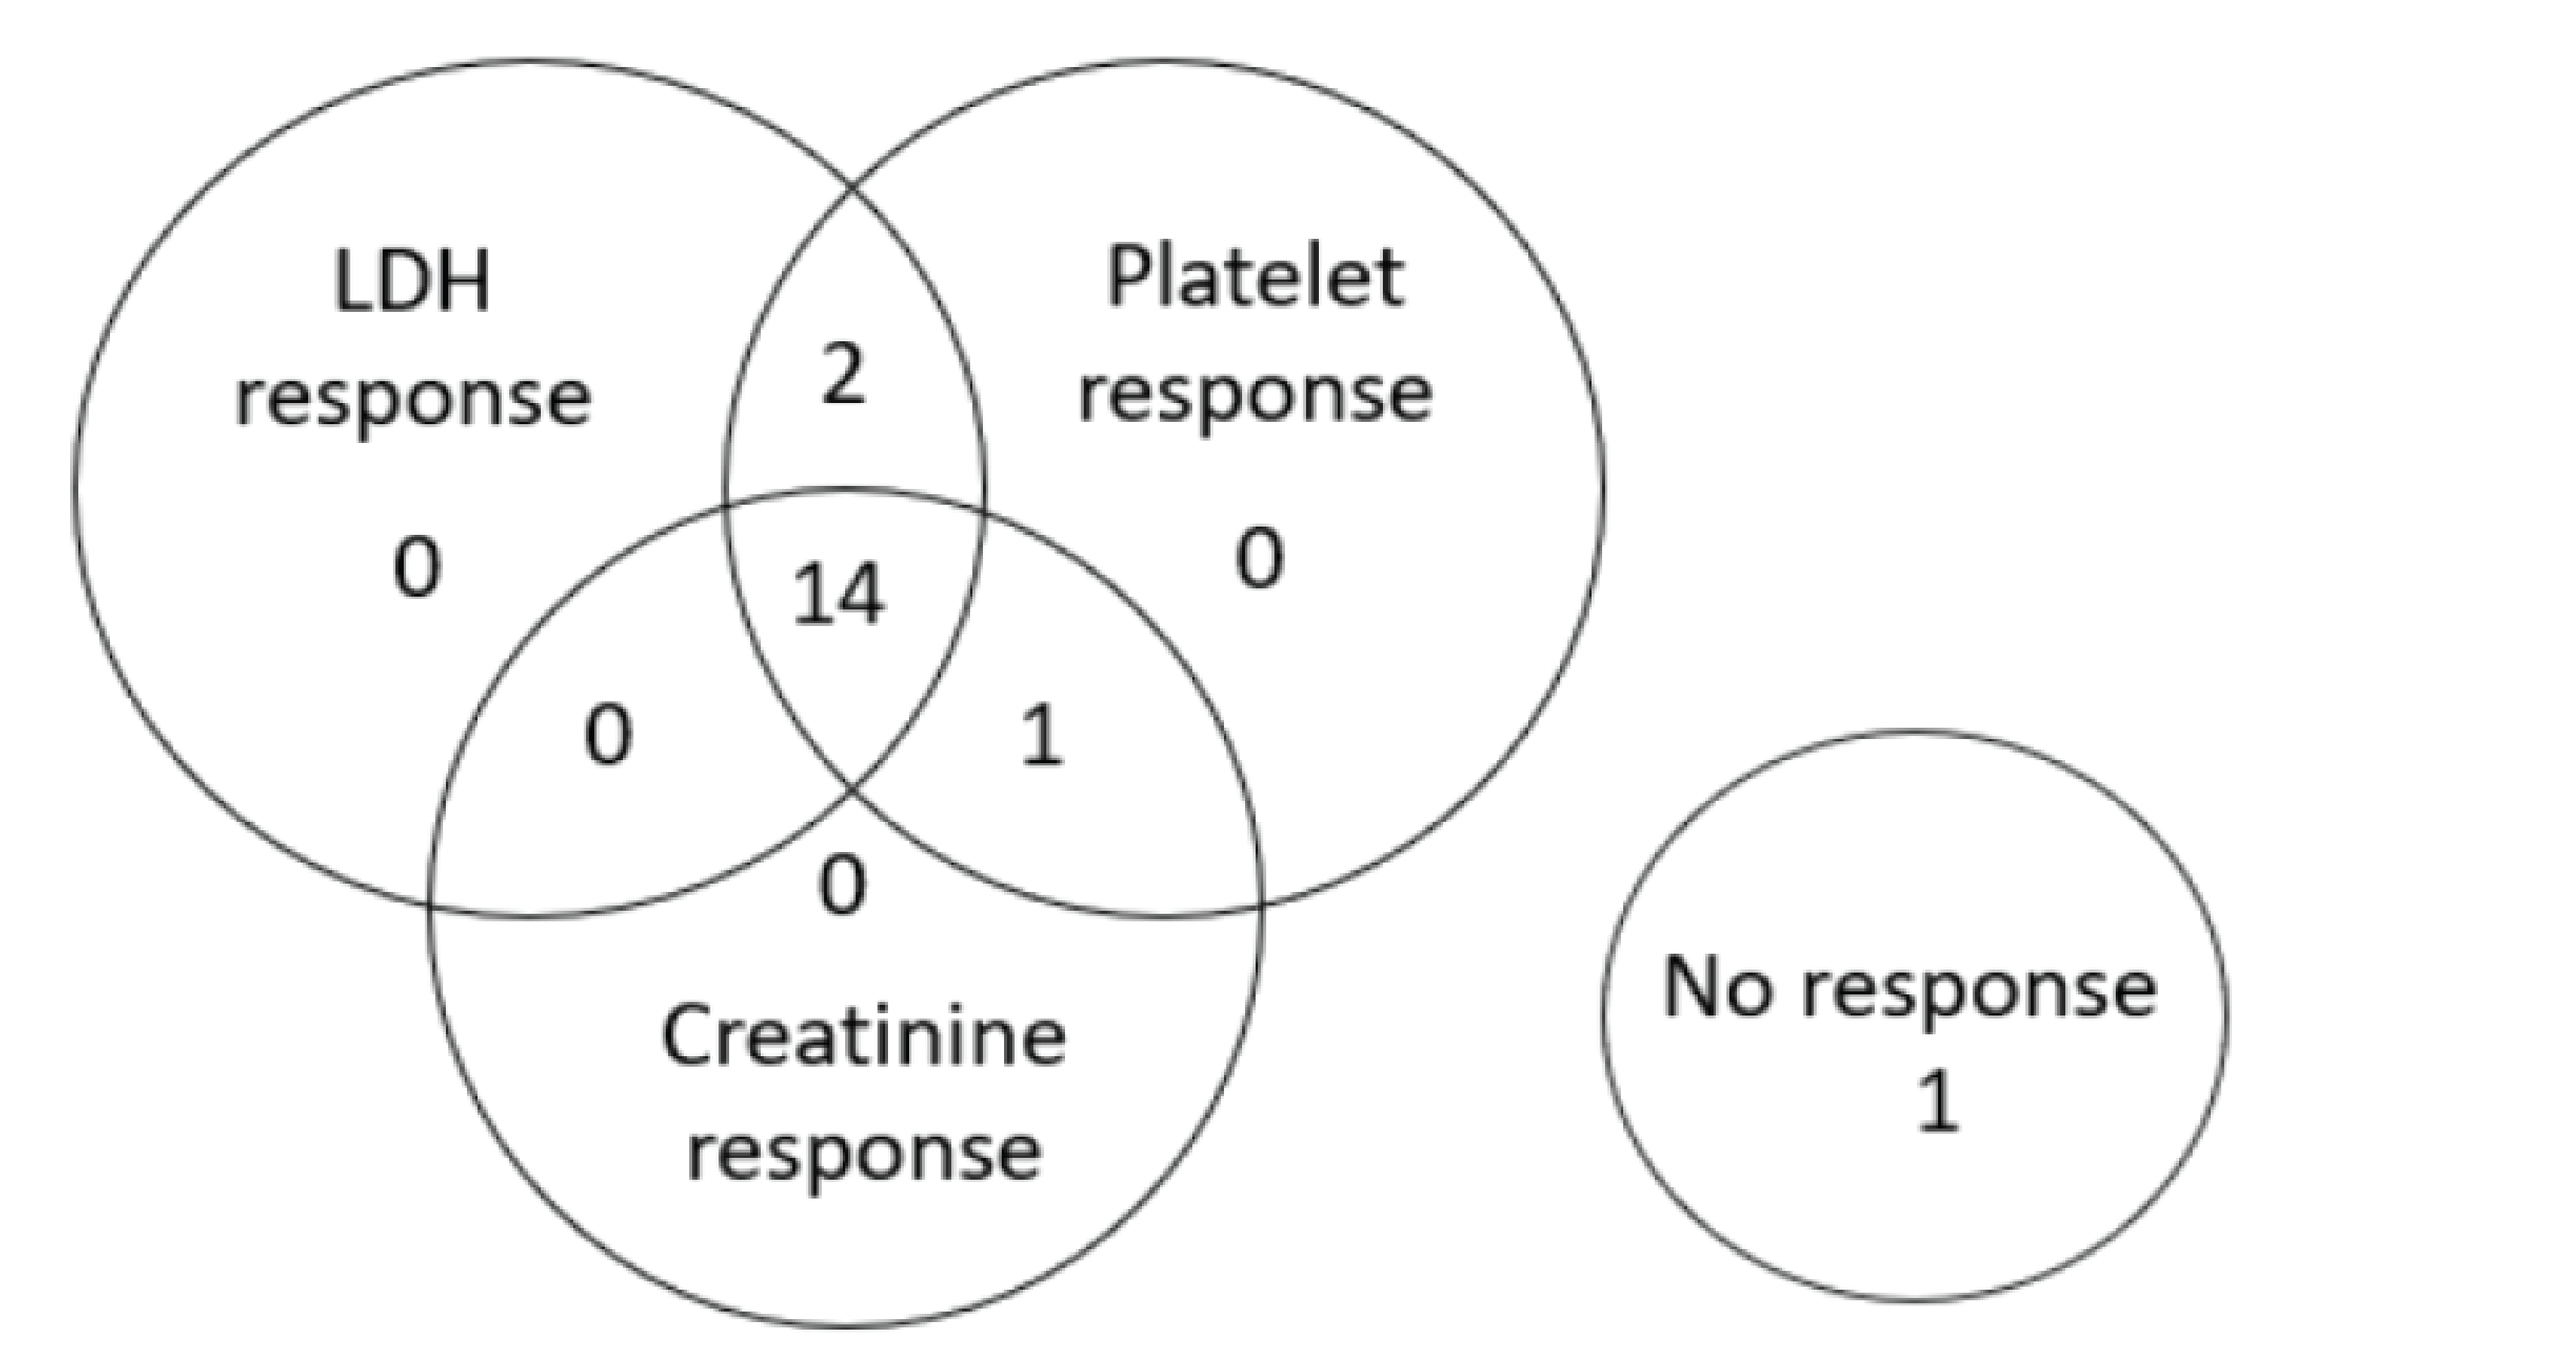 This figure shows that 14 patients achieved complete TMA response; 2 patients achieved normalization of platelet and LDH; 1 patient did not achieve any of the 3 components of the complete TMA response.